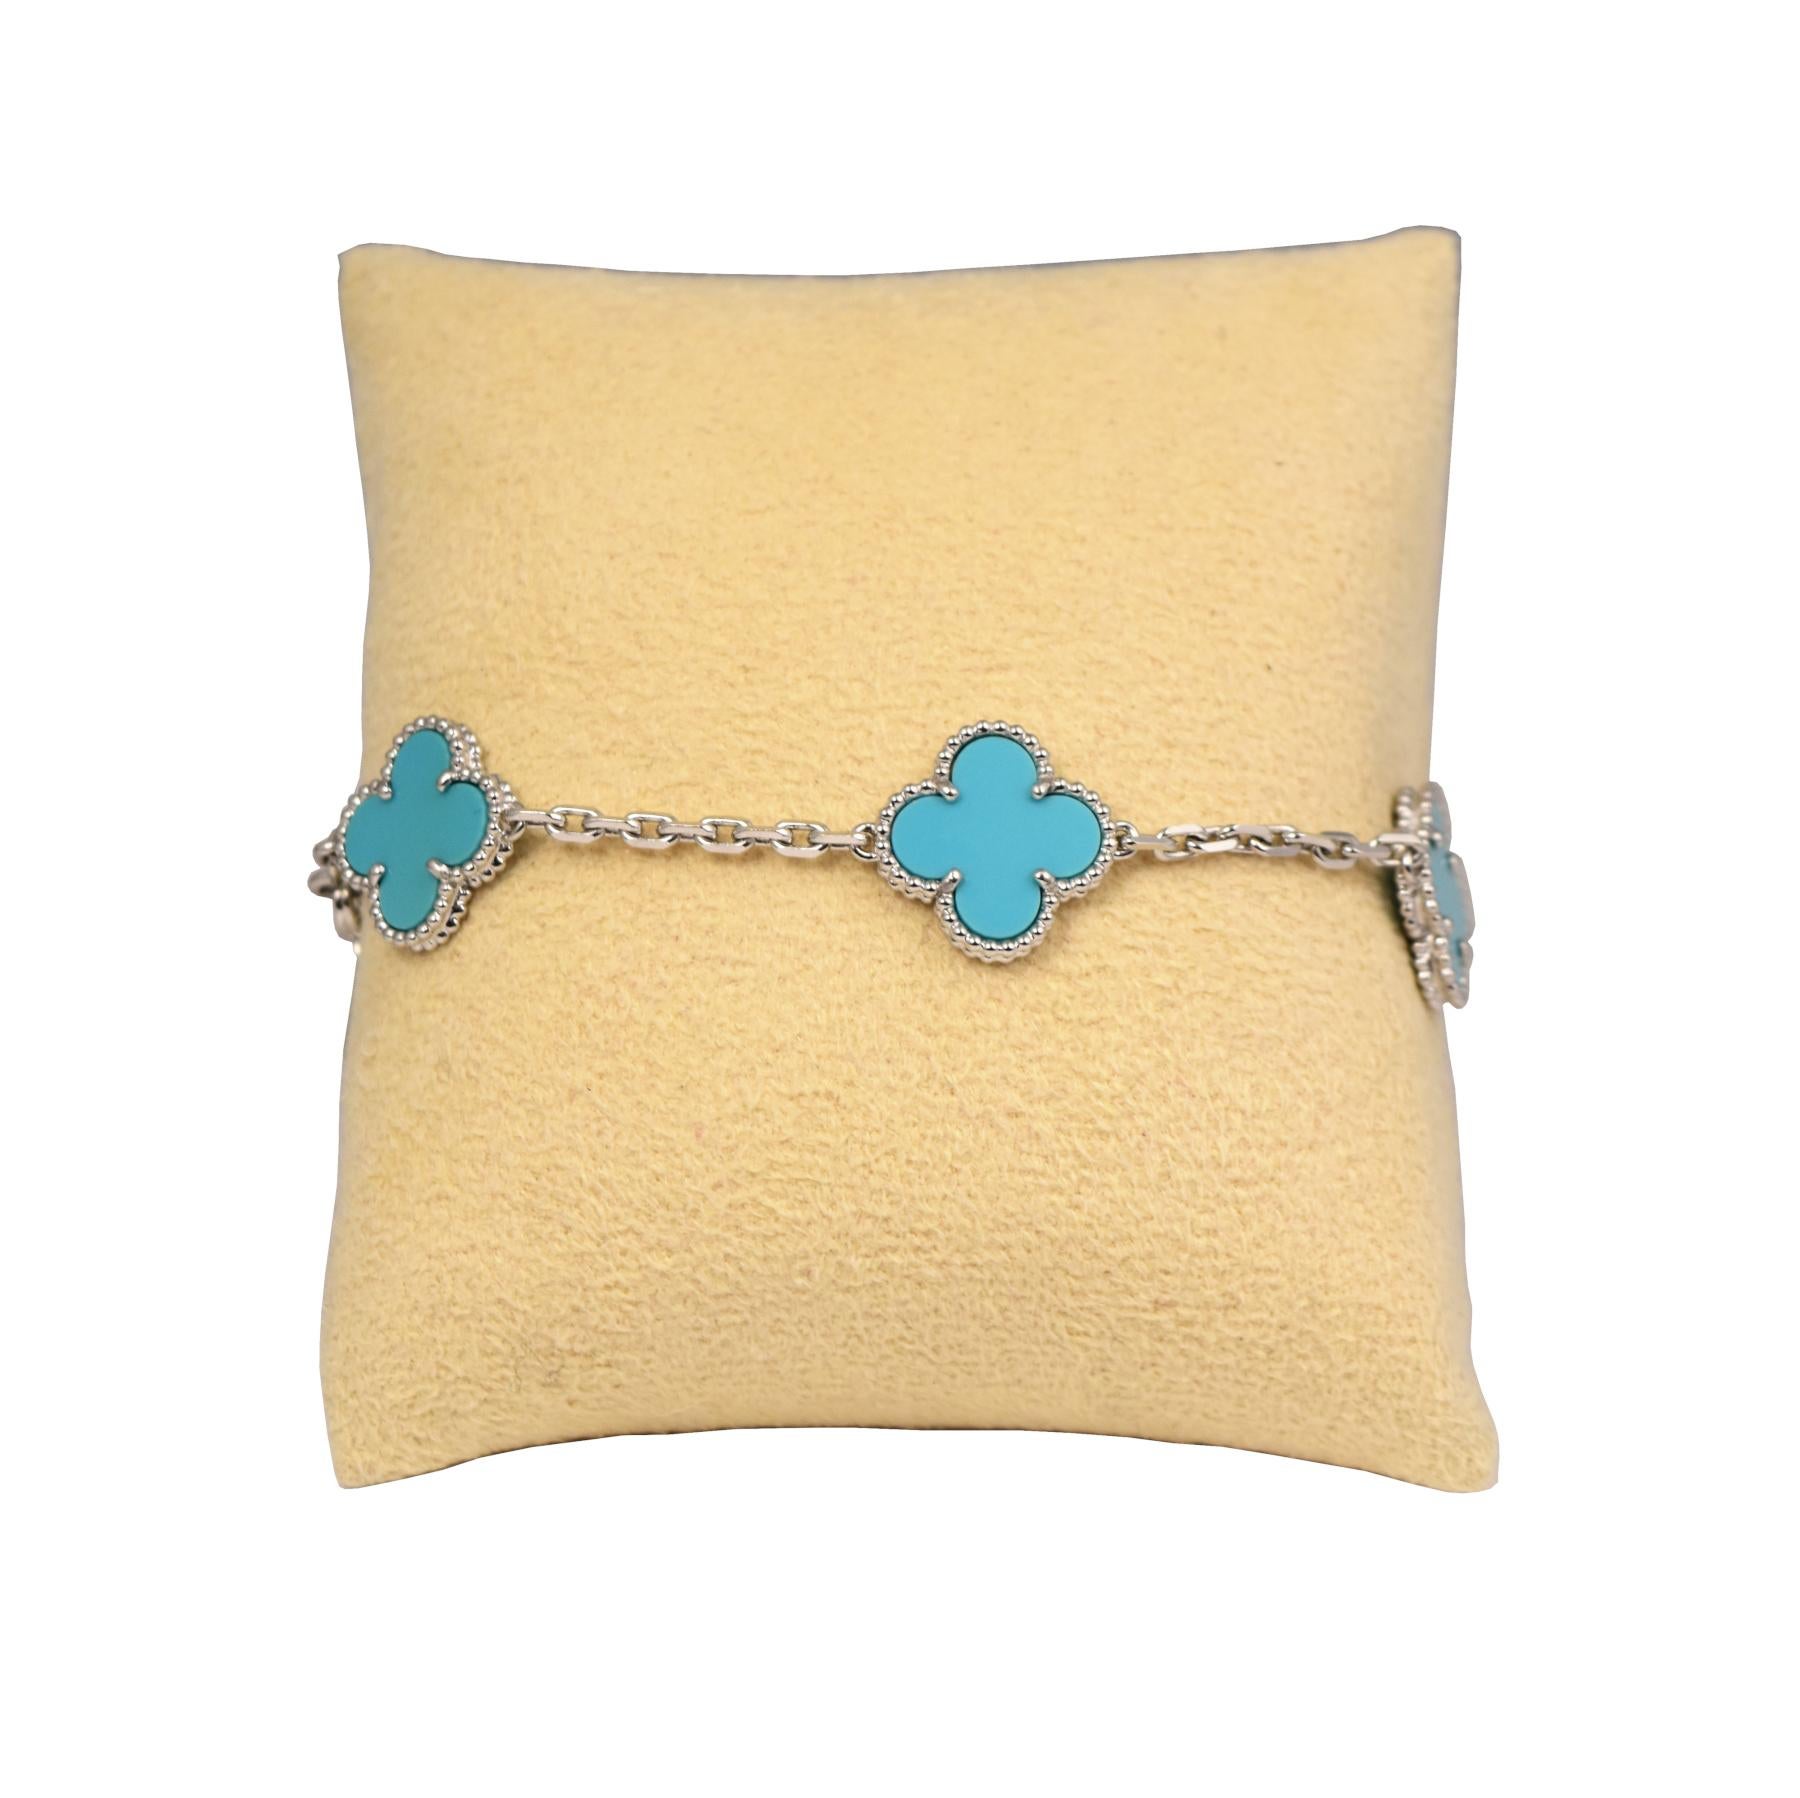 Designer: Van Cleef & Arpels

Collection: Vintage Alhambra

Style: 5 Motifs Bracelet

Material: White Gold

Metal Purity: 18k

Stones: Turquoise

Bracelet Length: 7.5 inches

Hallmark: VCA 750 Serial No.

Includes:  24 Months Brilliance Jewels